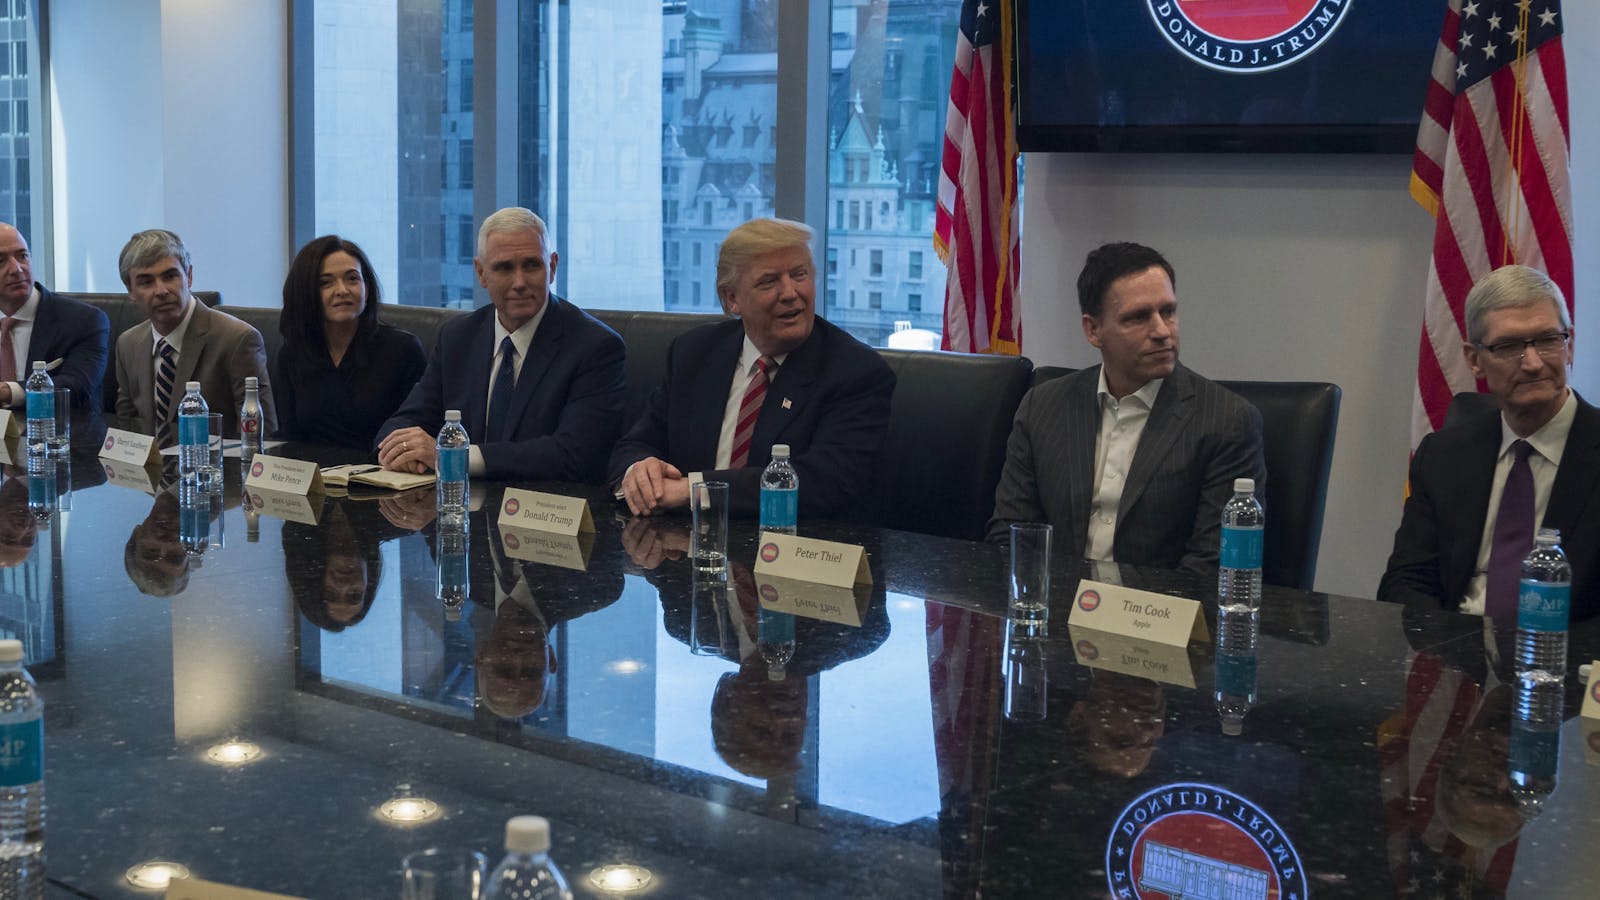 Tech leaders with President Trump. Photo by Bloomberg